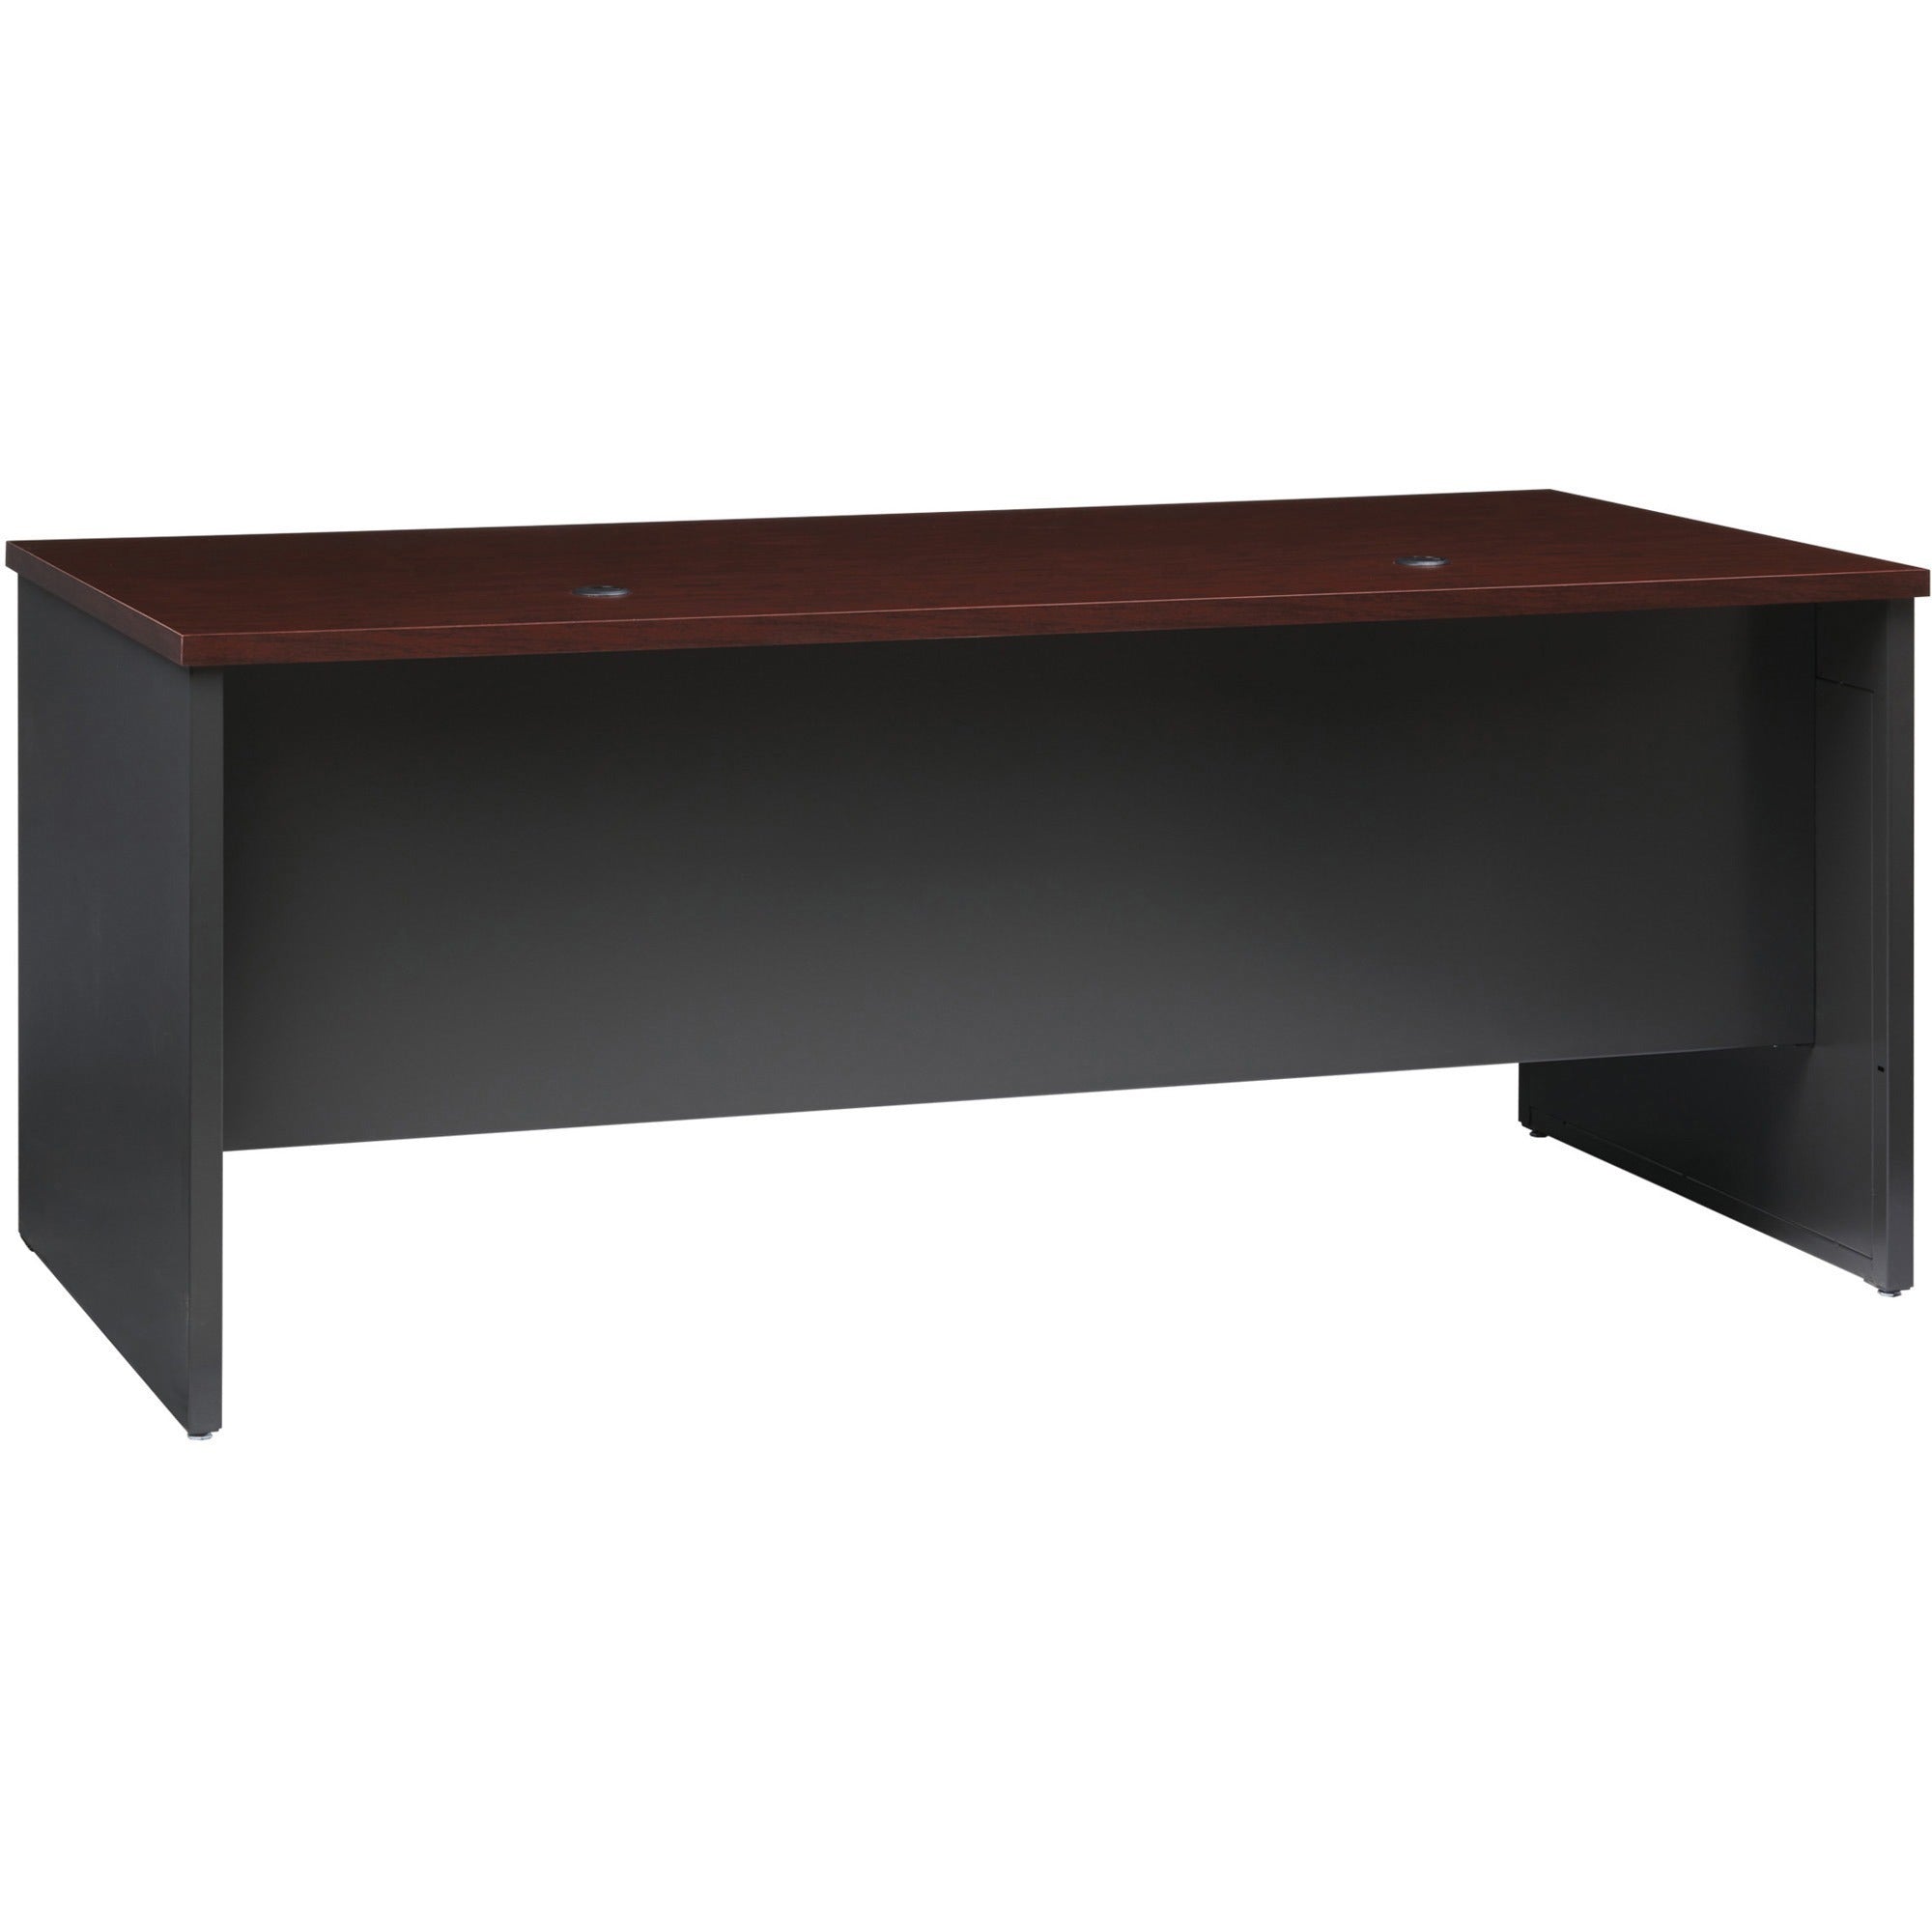 Lorell Fortress Modular Series Left-Pedestal Desk - 72" x 36" , 1.1" Top - 2 x Box, File Drawer(s) - Single Pedestal on Left Side - Material: Steel - Finish: Mahogany Laminate, Charcoal - Scratch Resistant, Stain Resistant, Ball-bearing Suspension, G - 